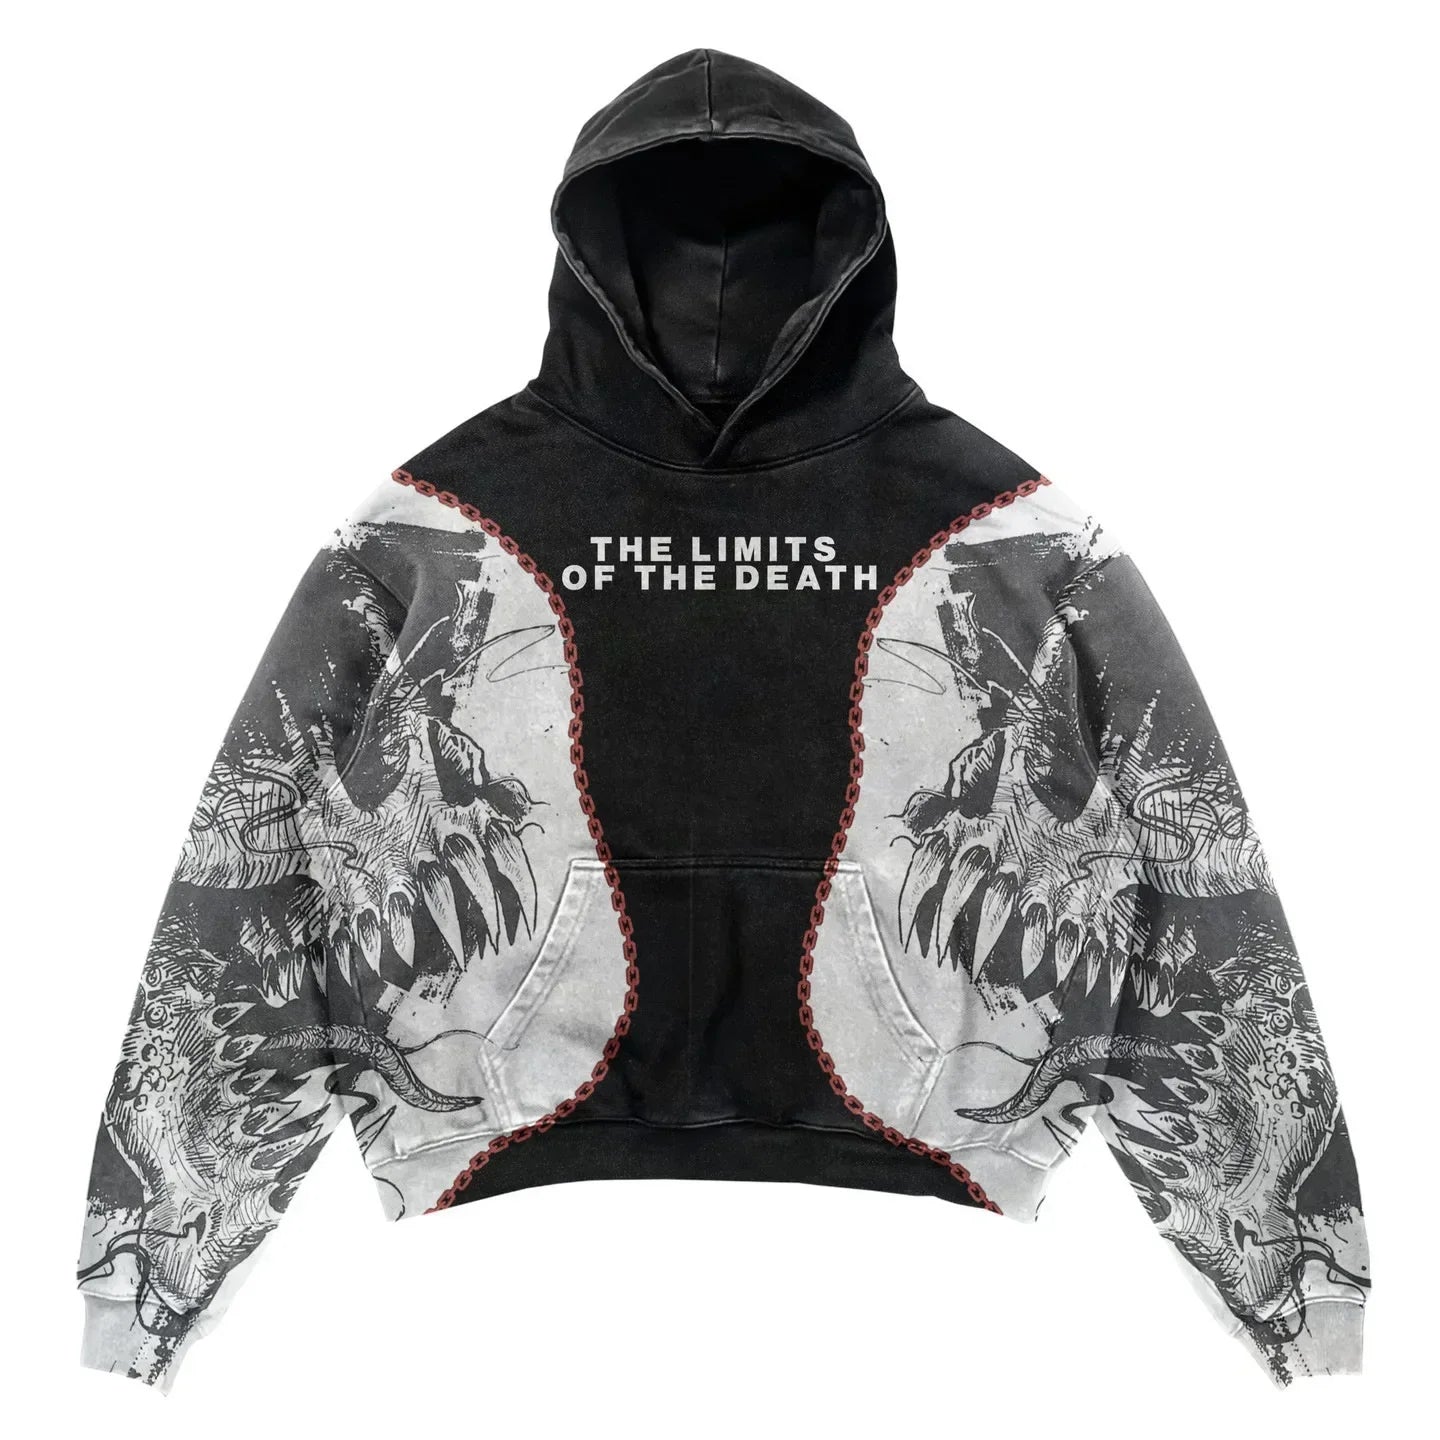 A black Explosions Printed Skull Y2K Retro Hooded Sweater Coat Street Style Gothic Casual Fashion Hooded Sweater Men's Female with a large graphic of snarling teeth and claws on the front and sleeves, perfect for those who love punk style. The text "THE LIMITS OF THE DEATH" is boldly printed across the chest, making it a standout piece in Maramalive™ men's clothing hoodies.